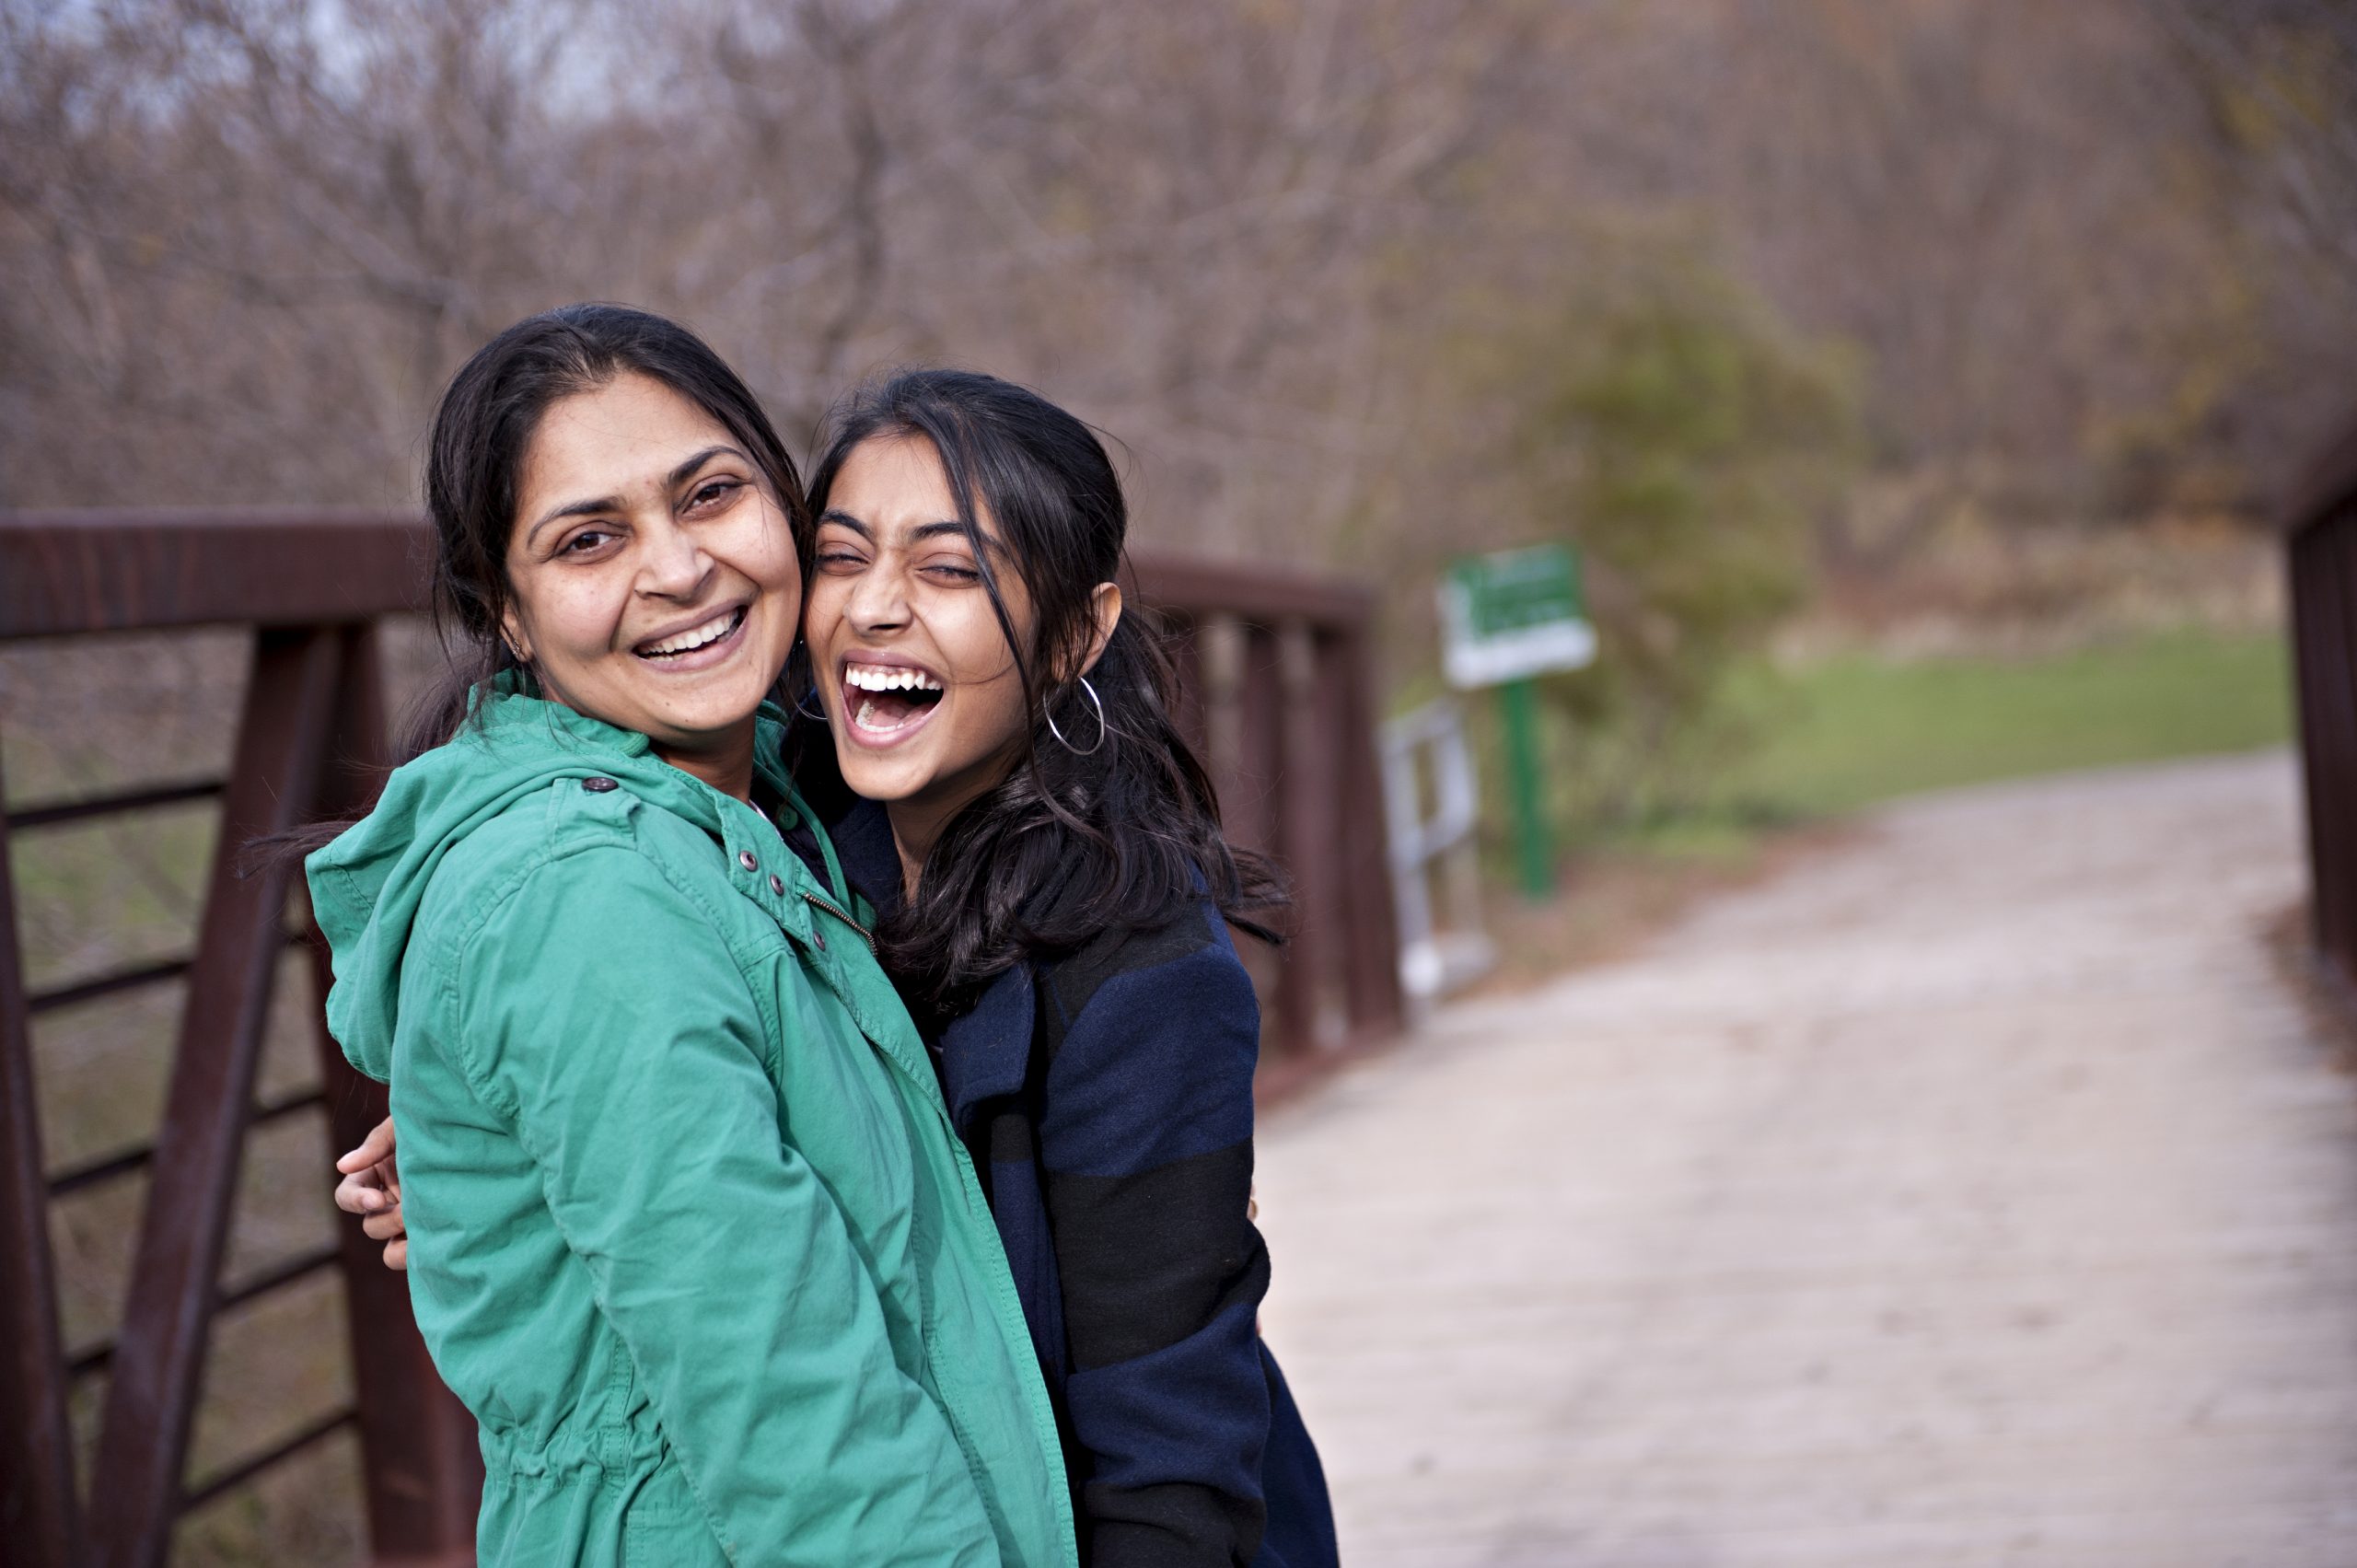 Photograph of two young women in jackets laughing